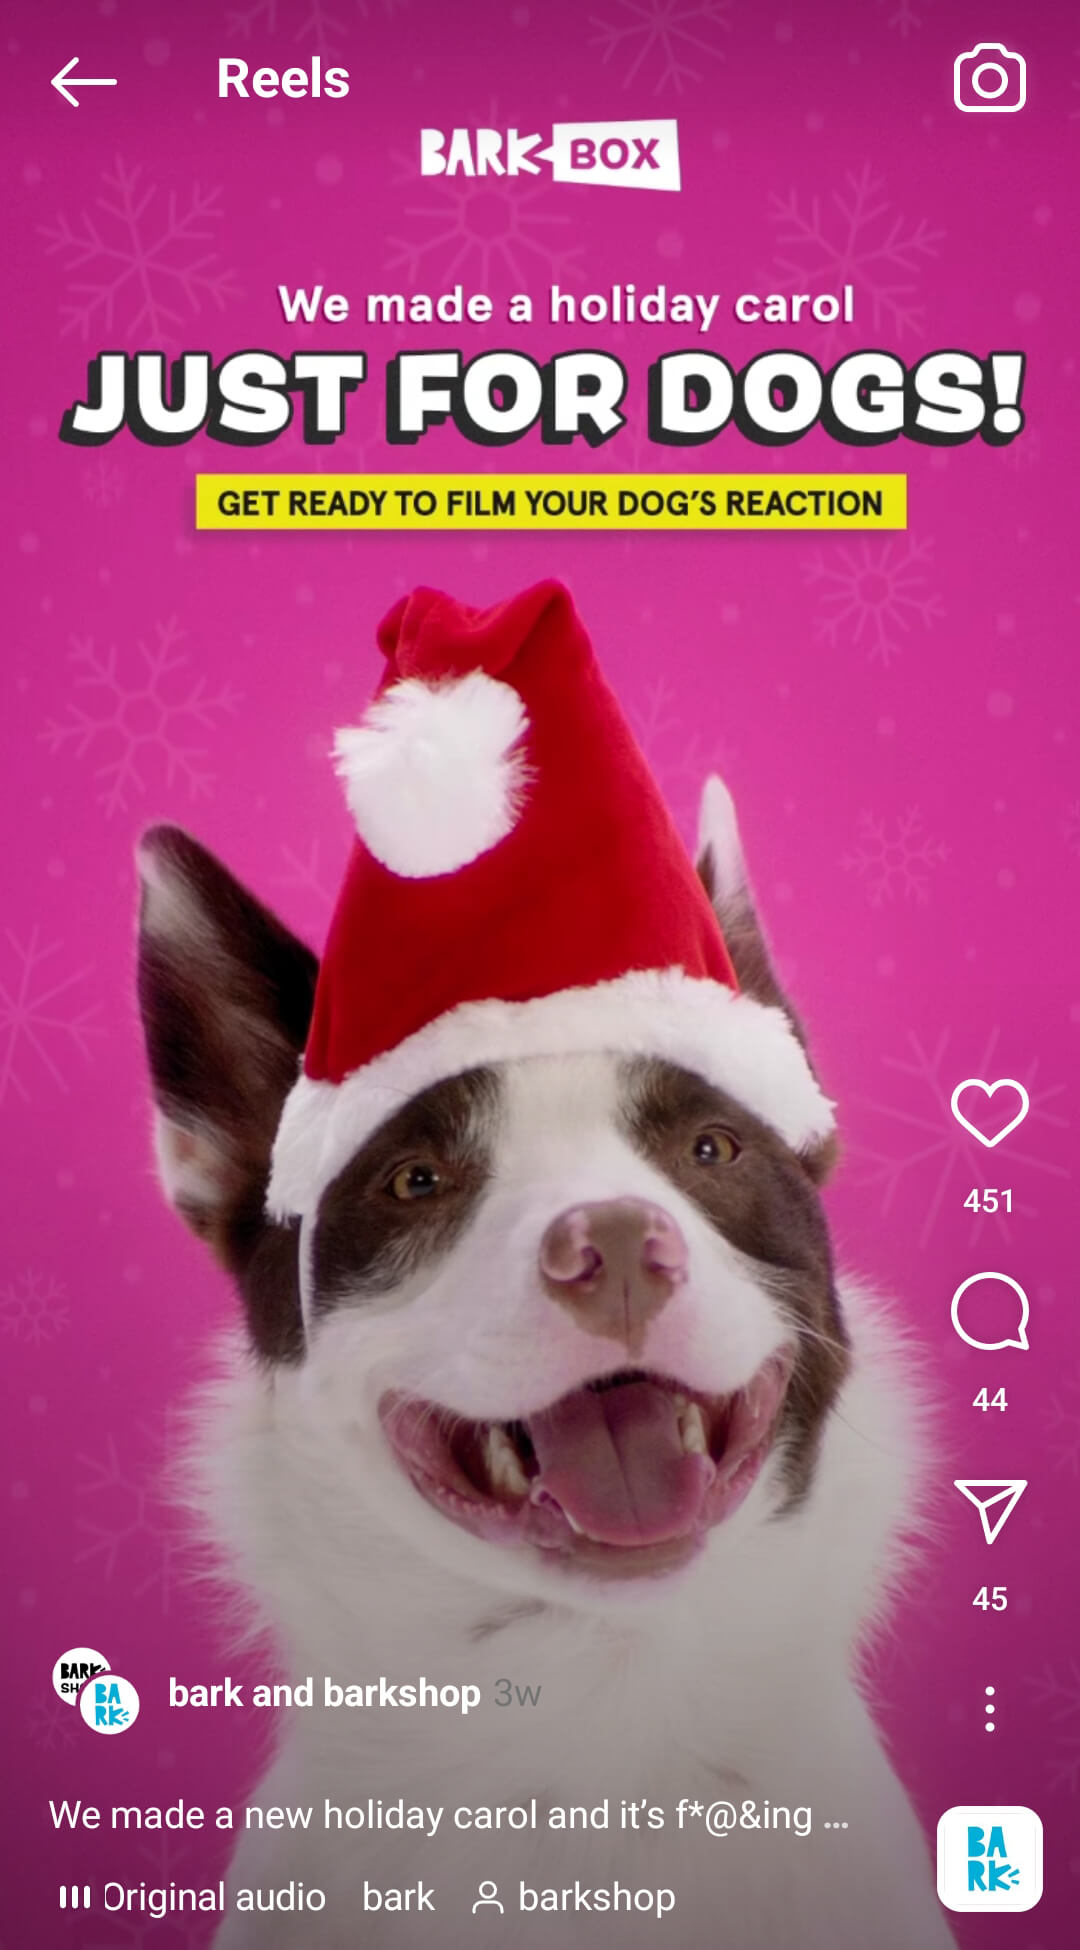 how-to-boost-your-instagram-engagement-do-not-create-engagement-bait-reel-encourages-viewers-viewer-submitted-reactions-bark-barkshop-example-1